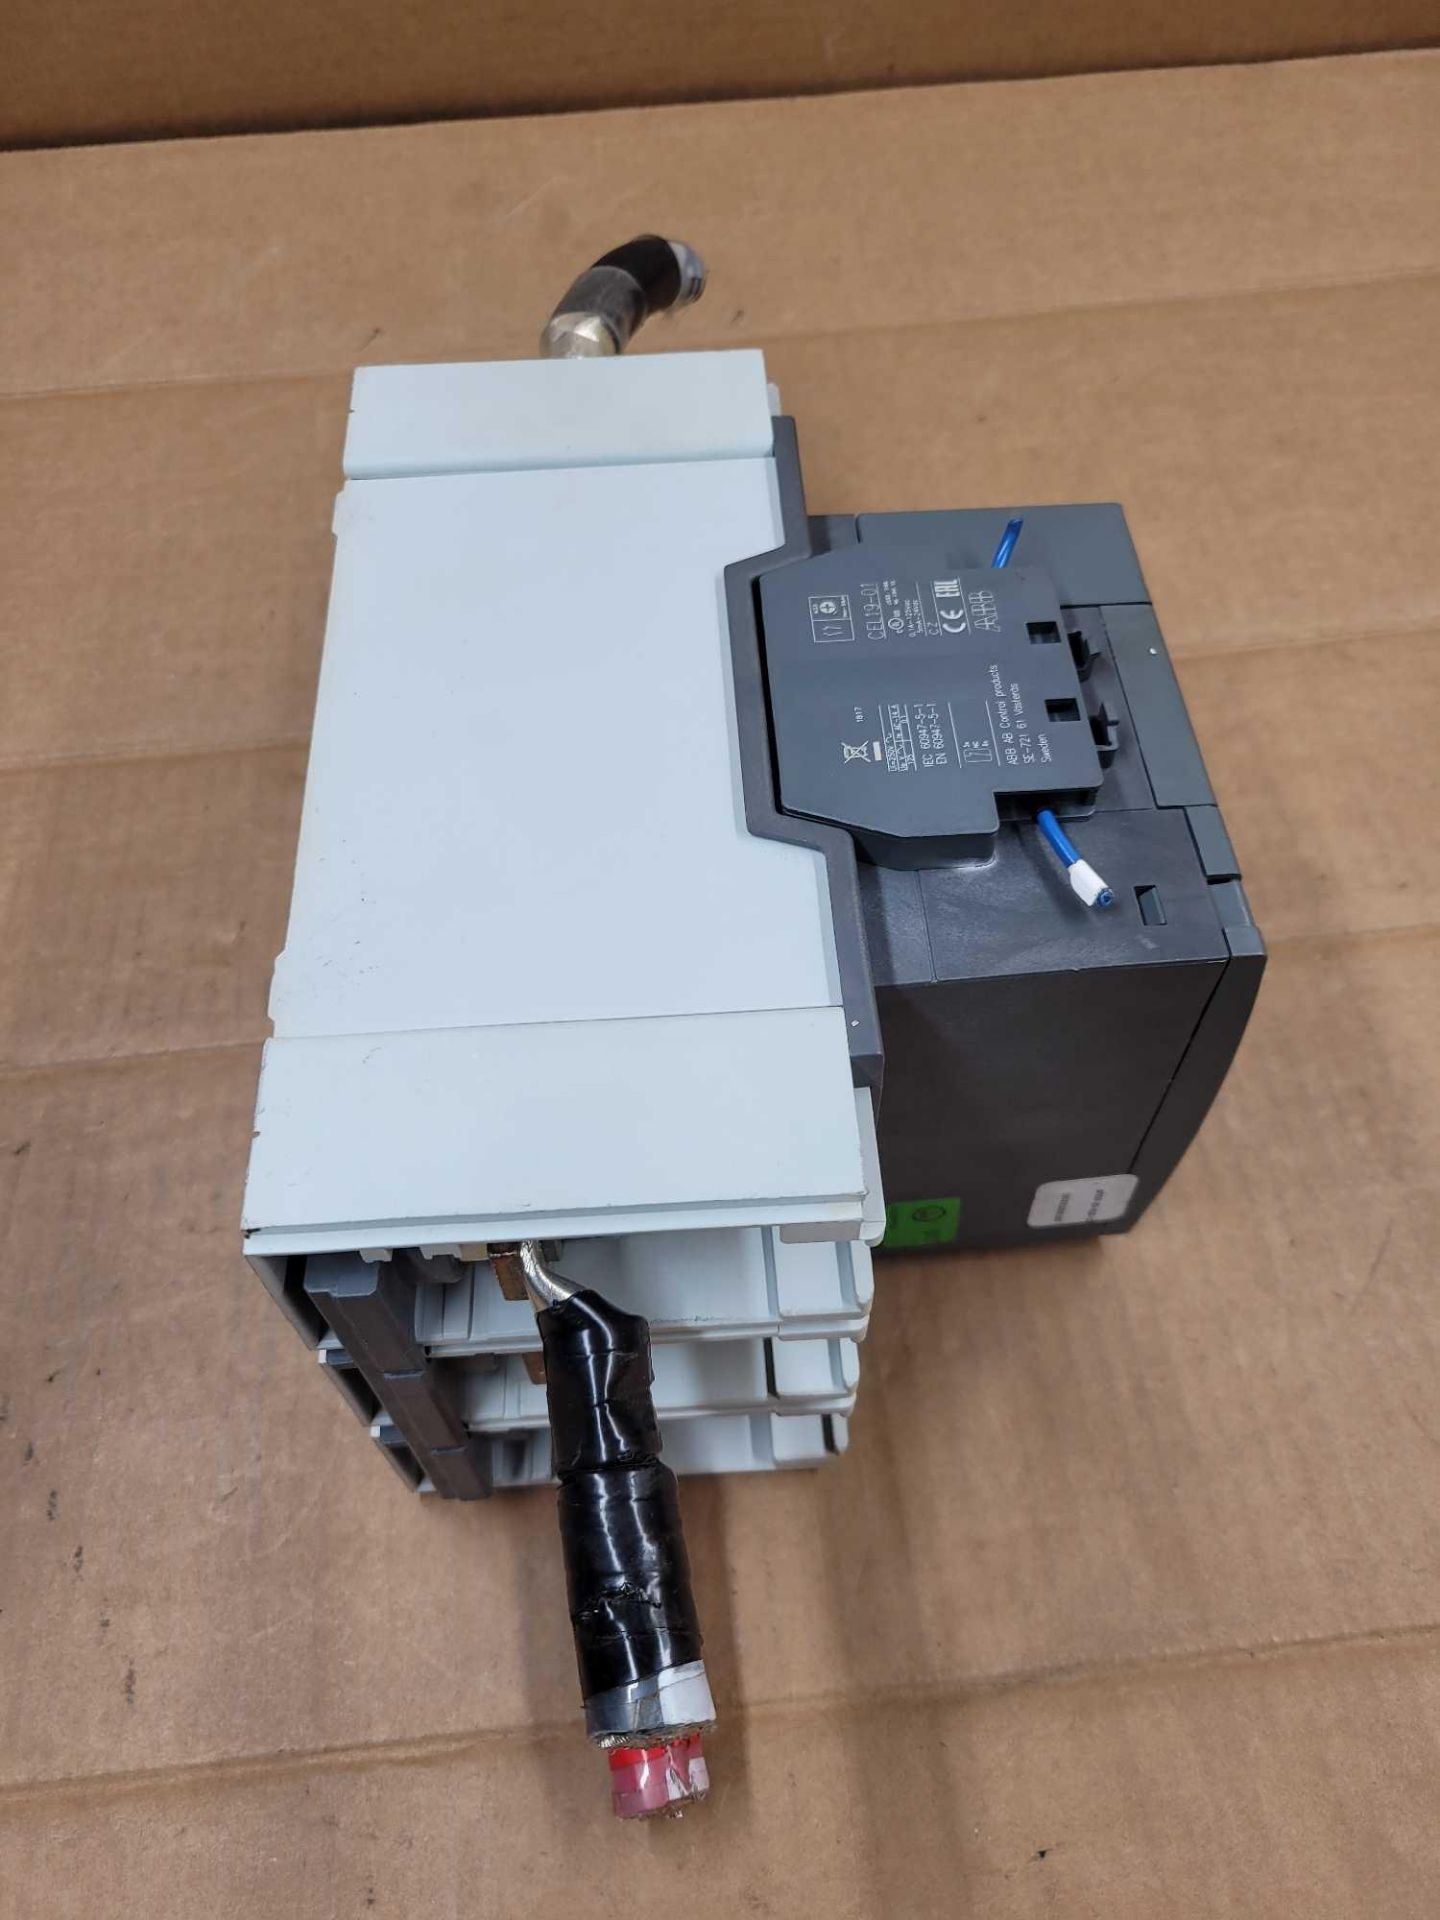 ABB AF305-30 / Contactor  /  Lot Weight: 12.6 lbs - Image 6 of 7